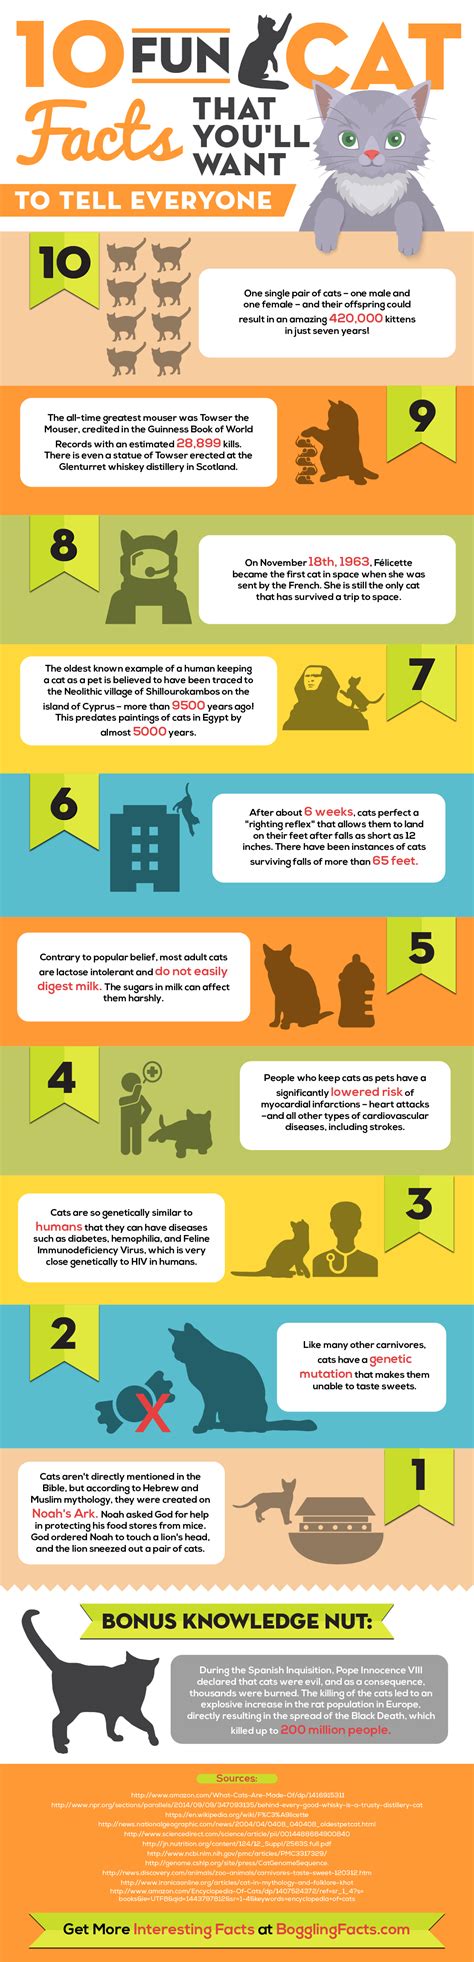 10 Interesting Cat Facts That You Ll Want To Tell Everyone [infographic]